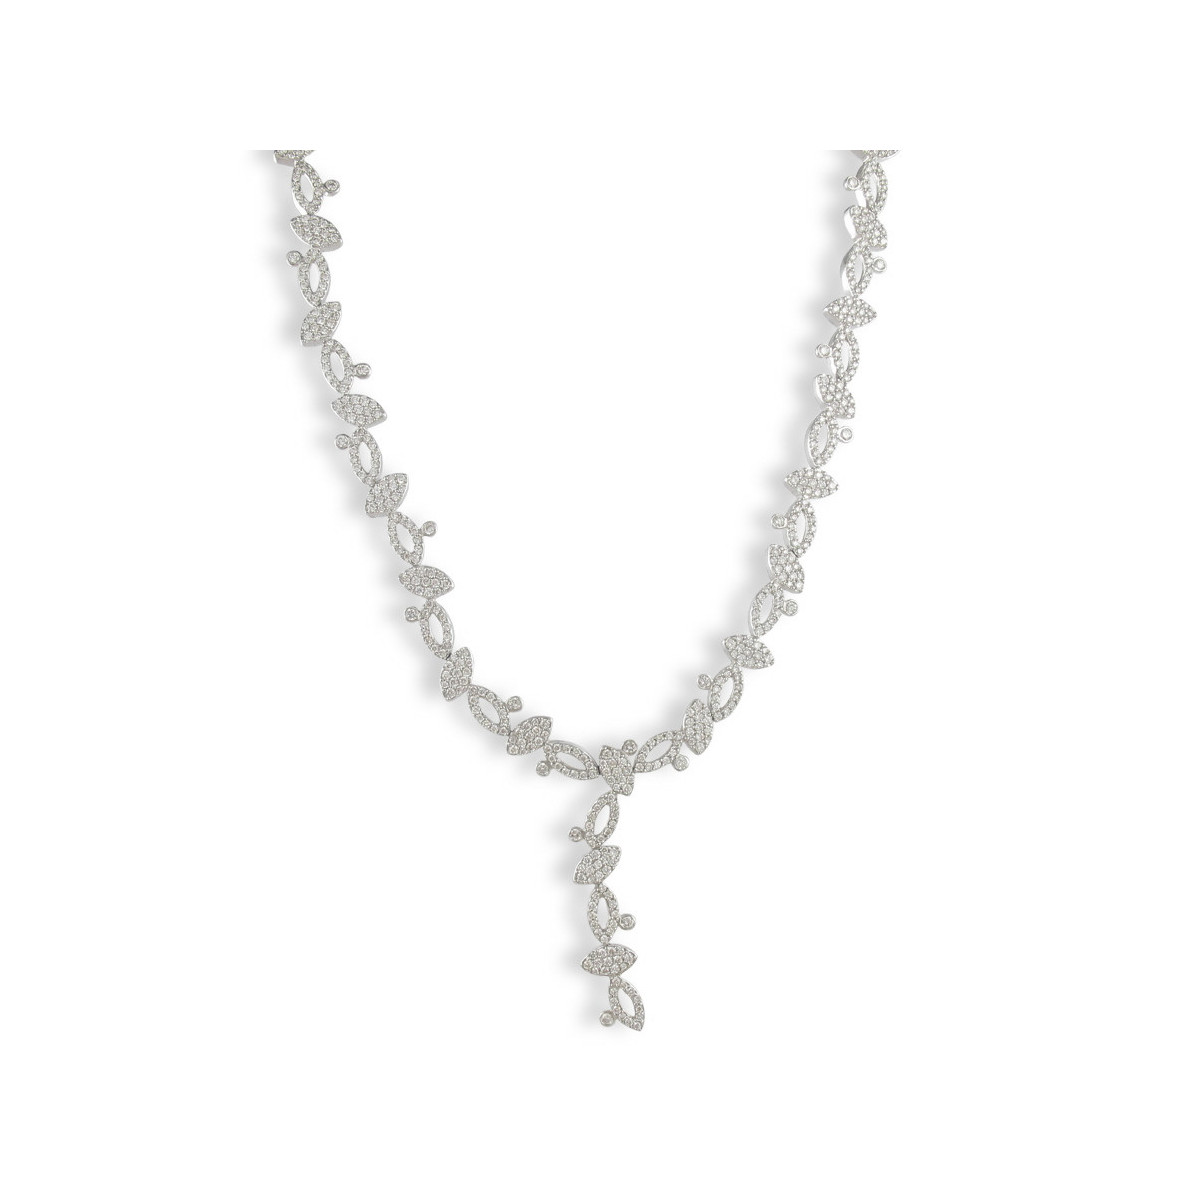 WHITE GOLD NECKLACE WITH DIAMONDS 2 CARATS